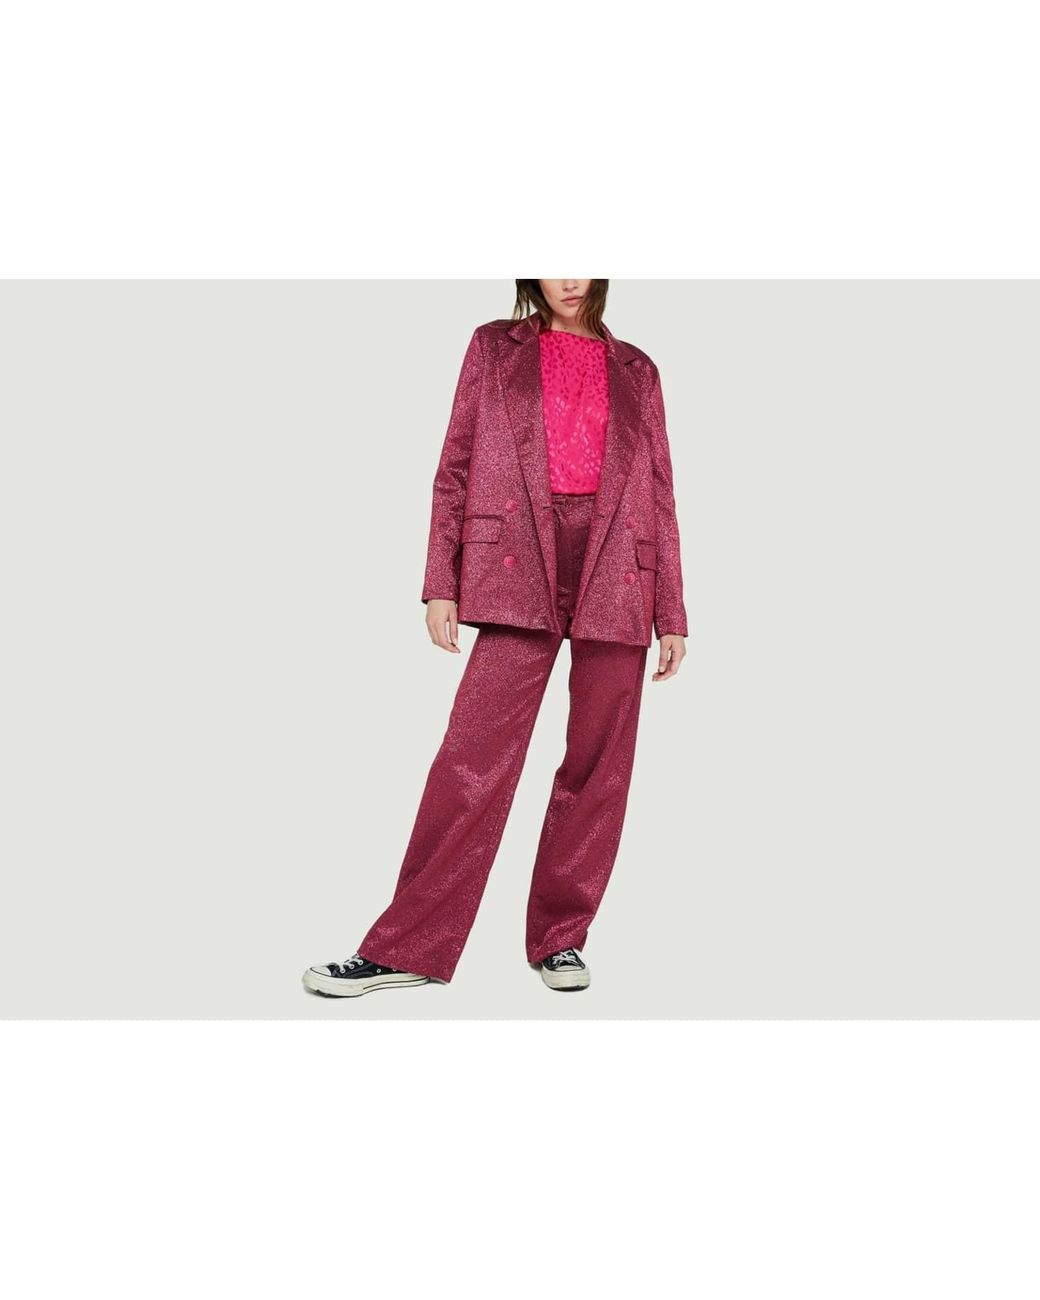 Modetrotter Valeria Glacis Jacket in Red | Lyst